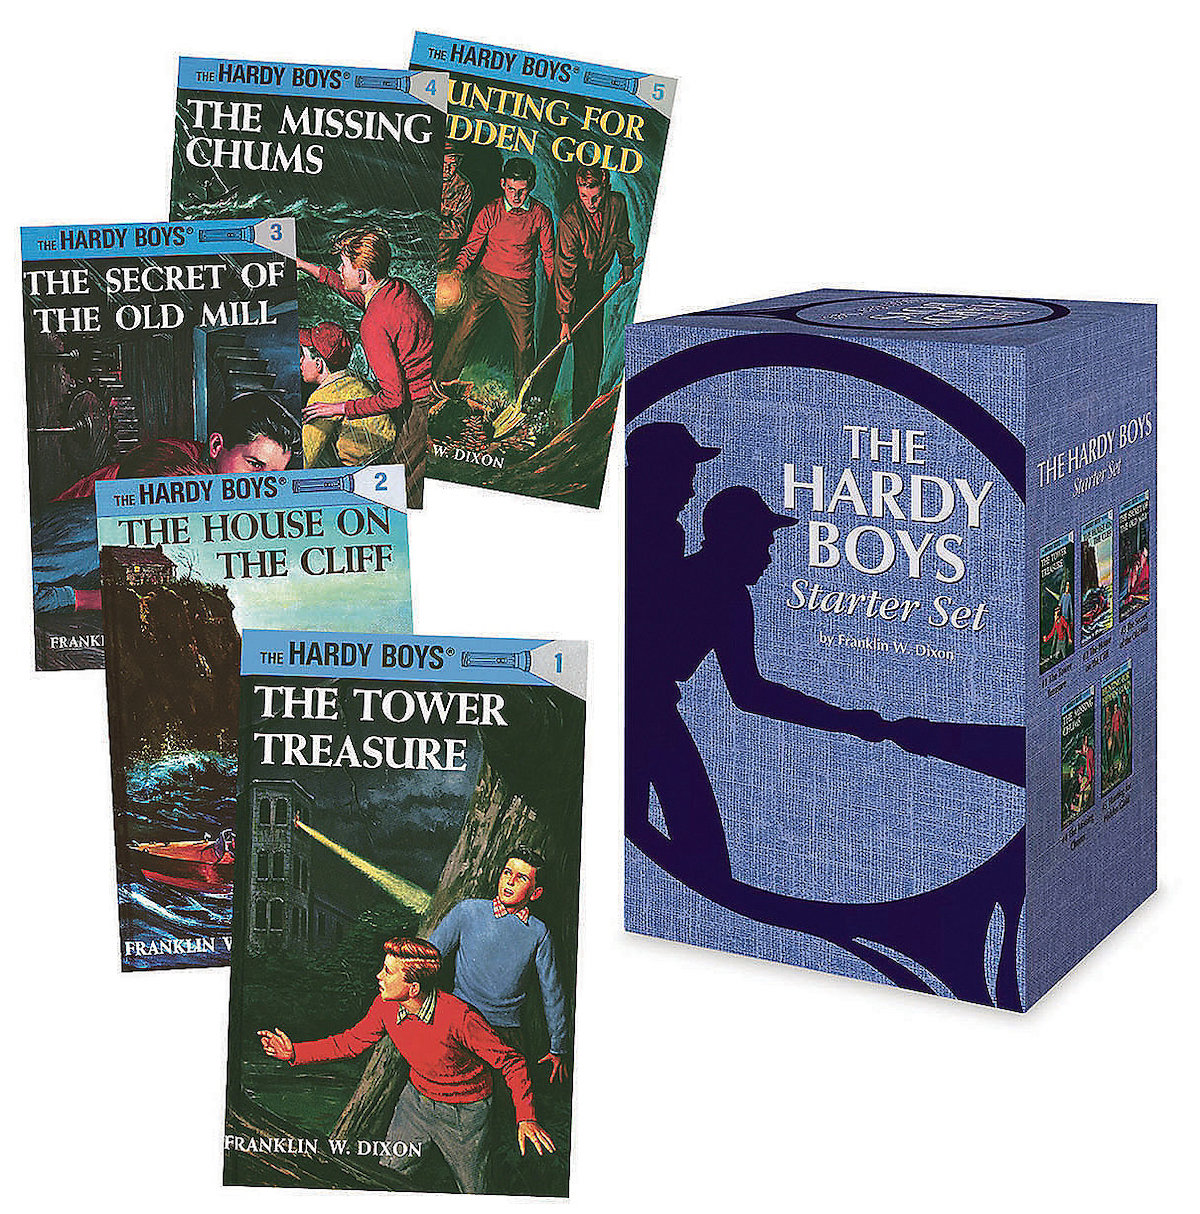 the hardy boys starter set with books displayed